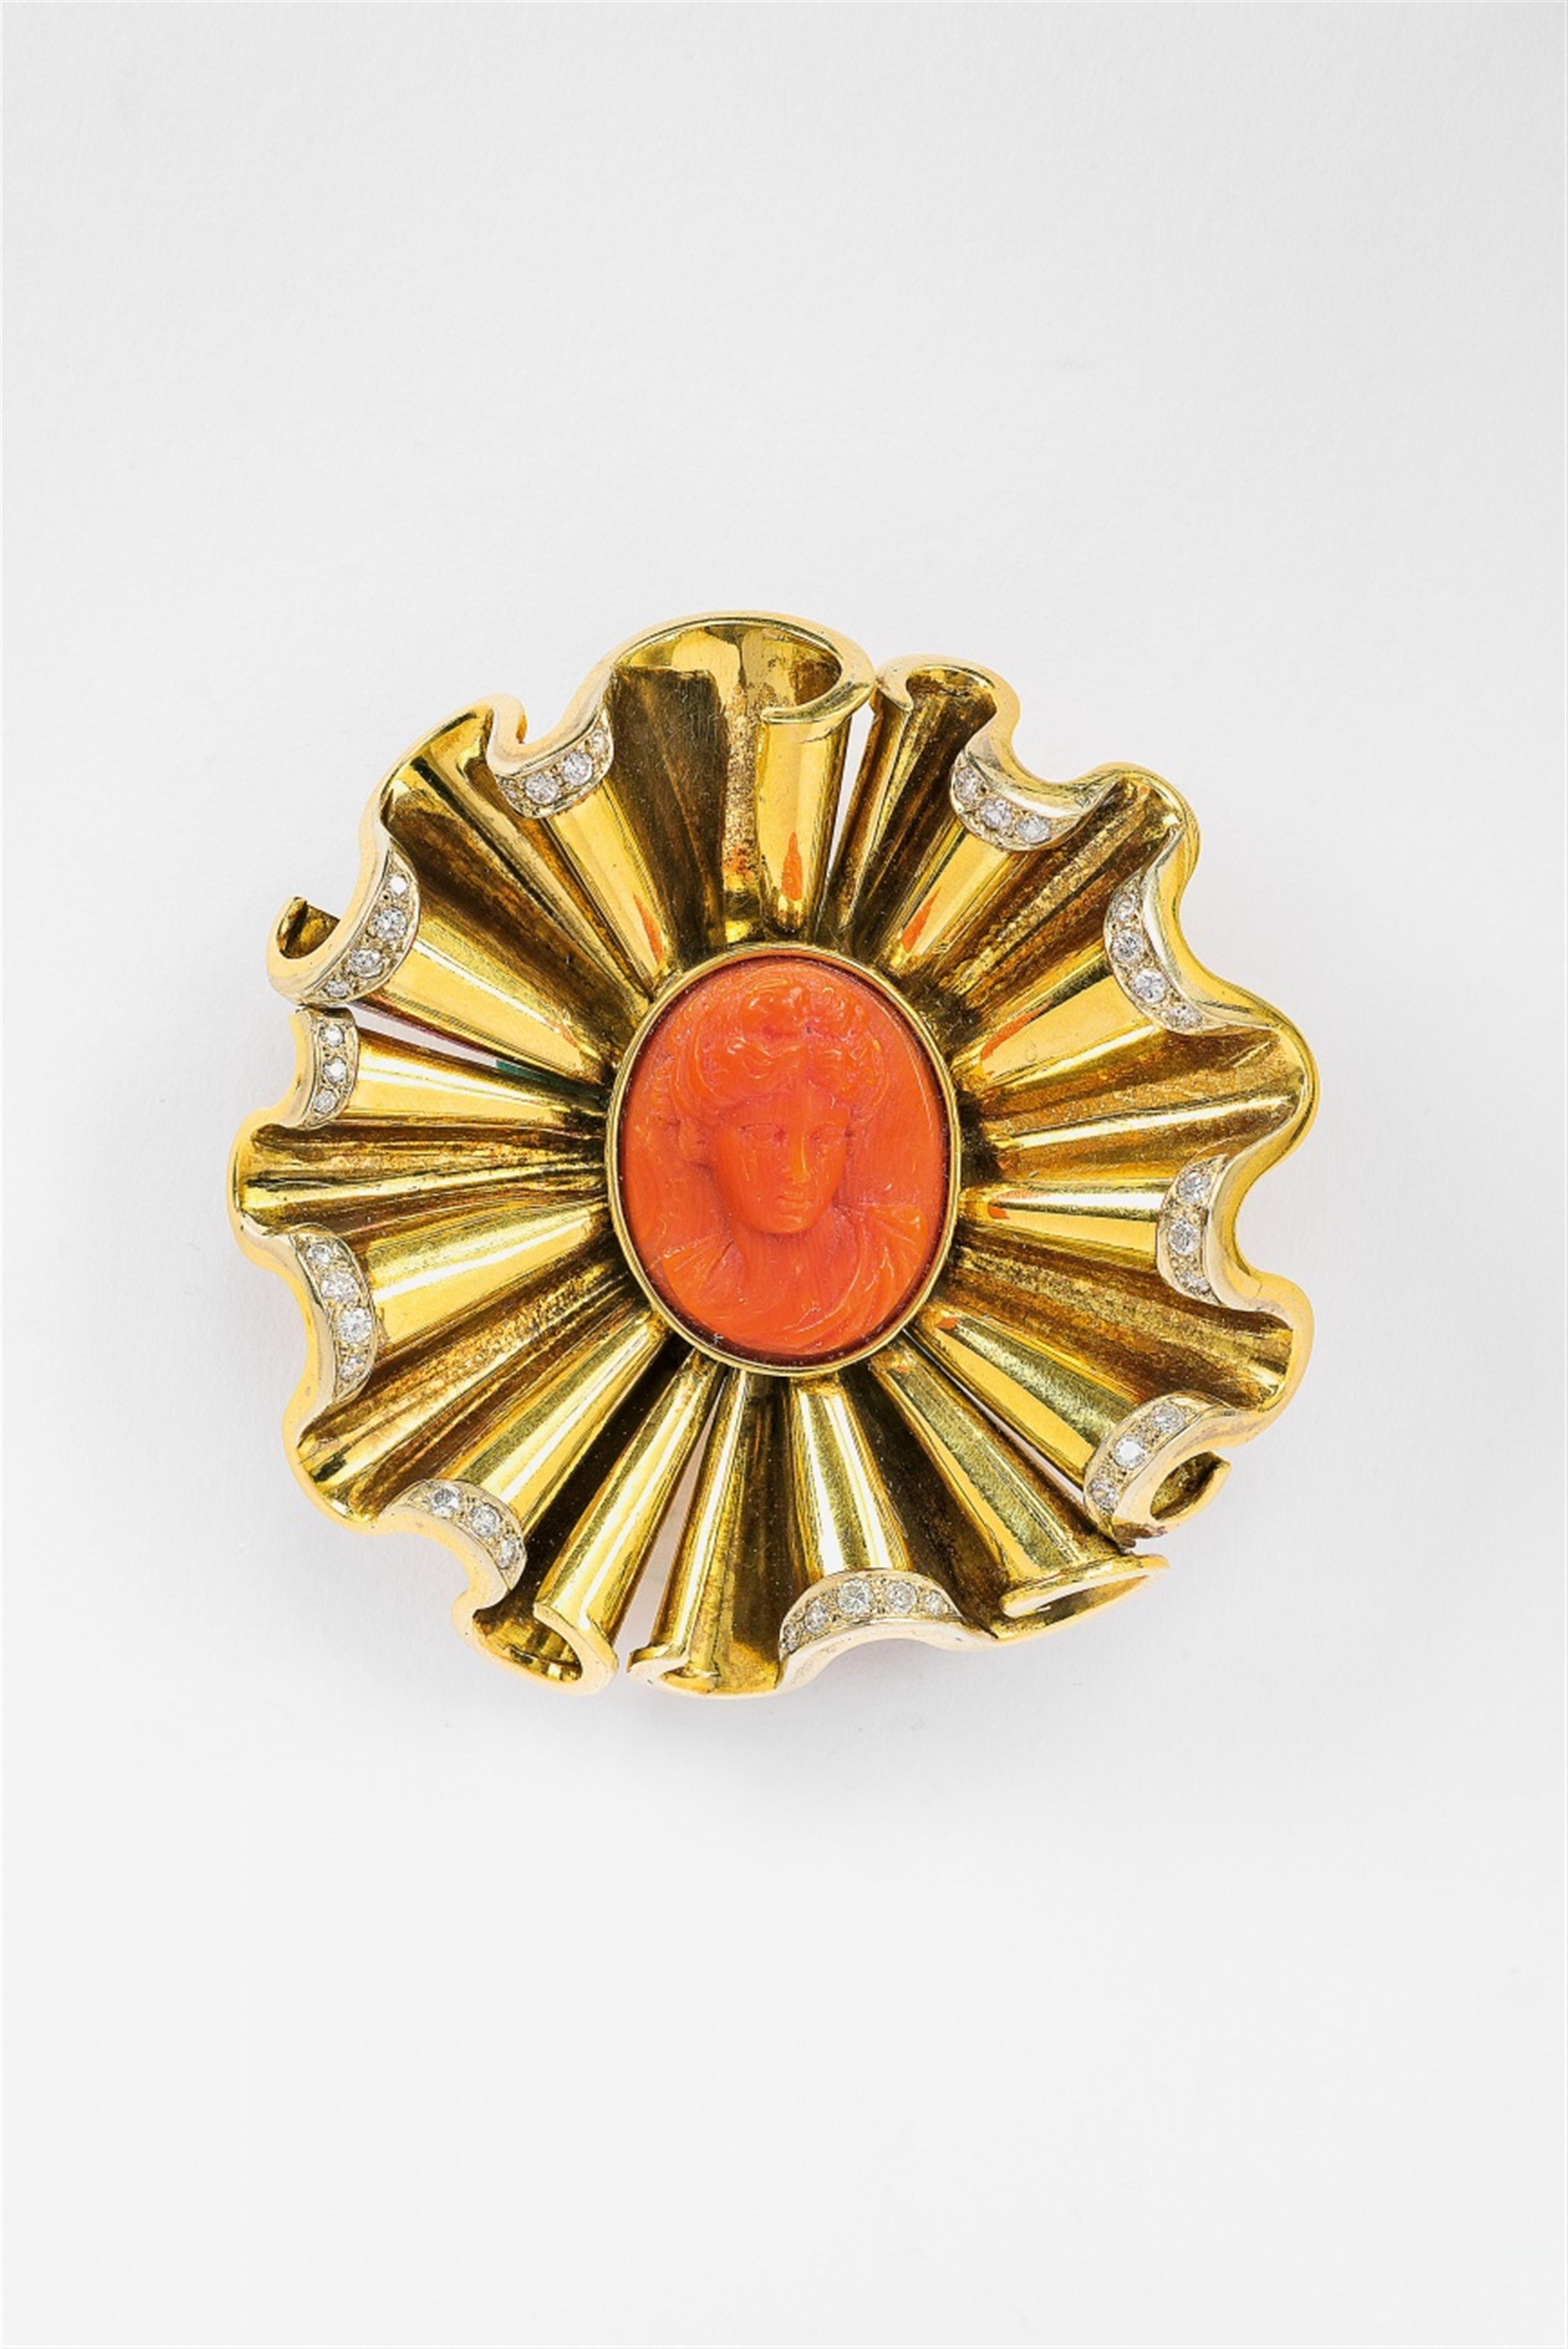 An 18k gold retro style cameo brooch - image-1